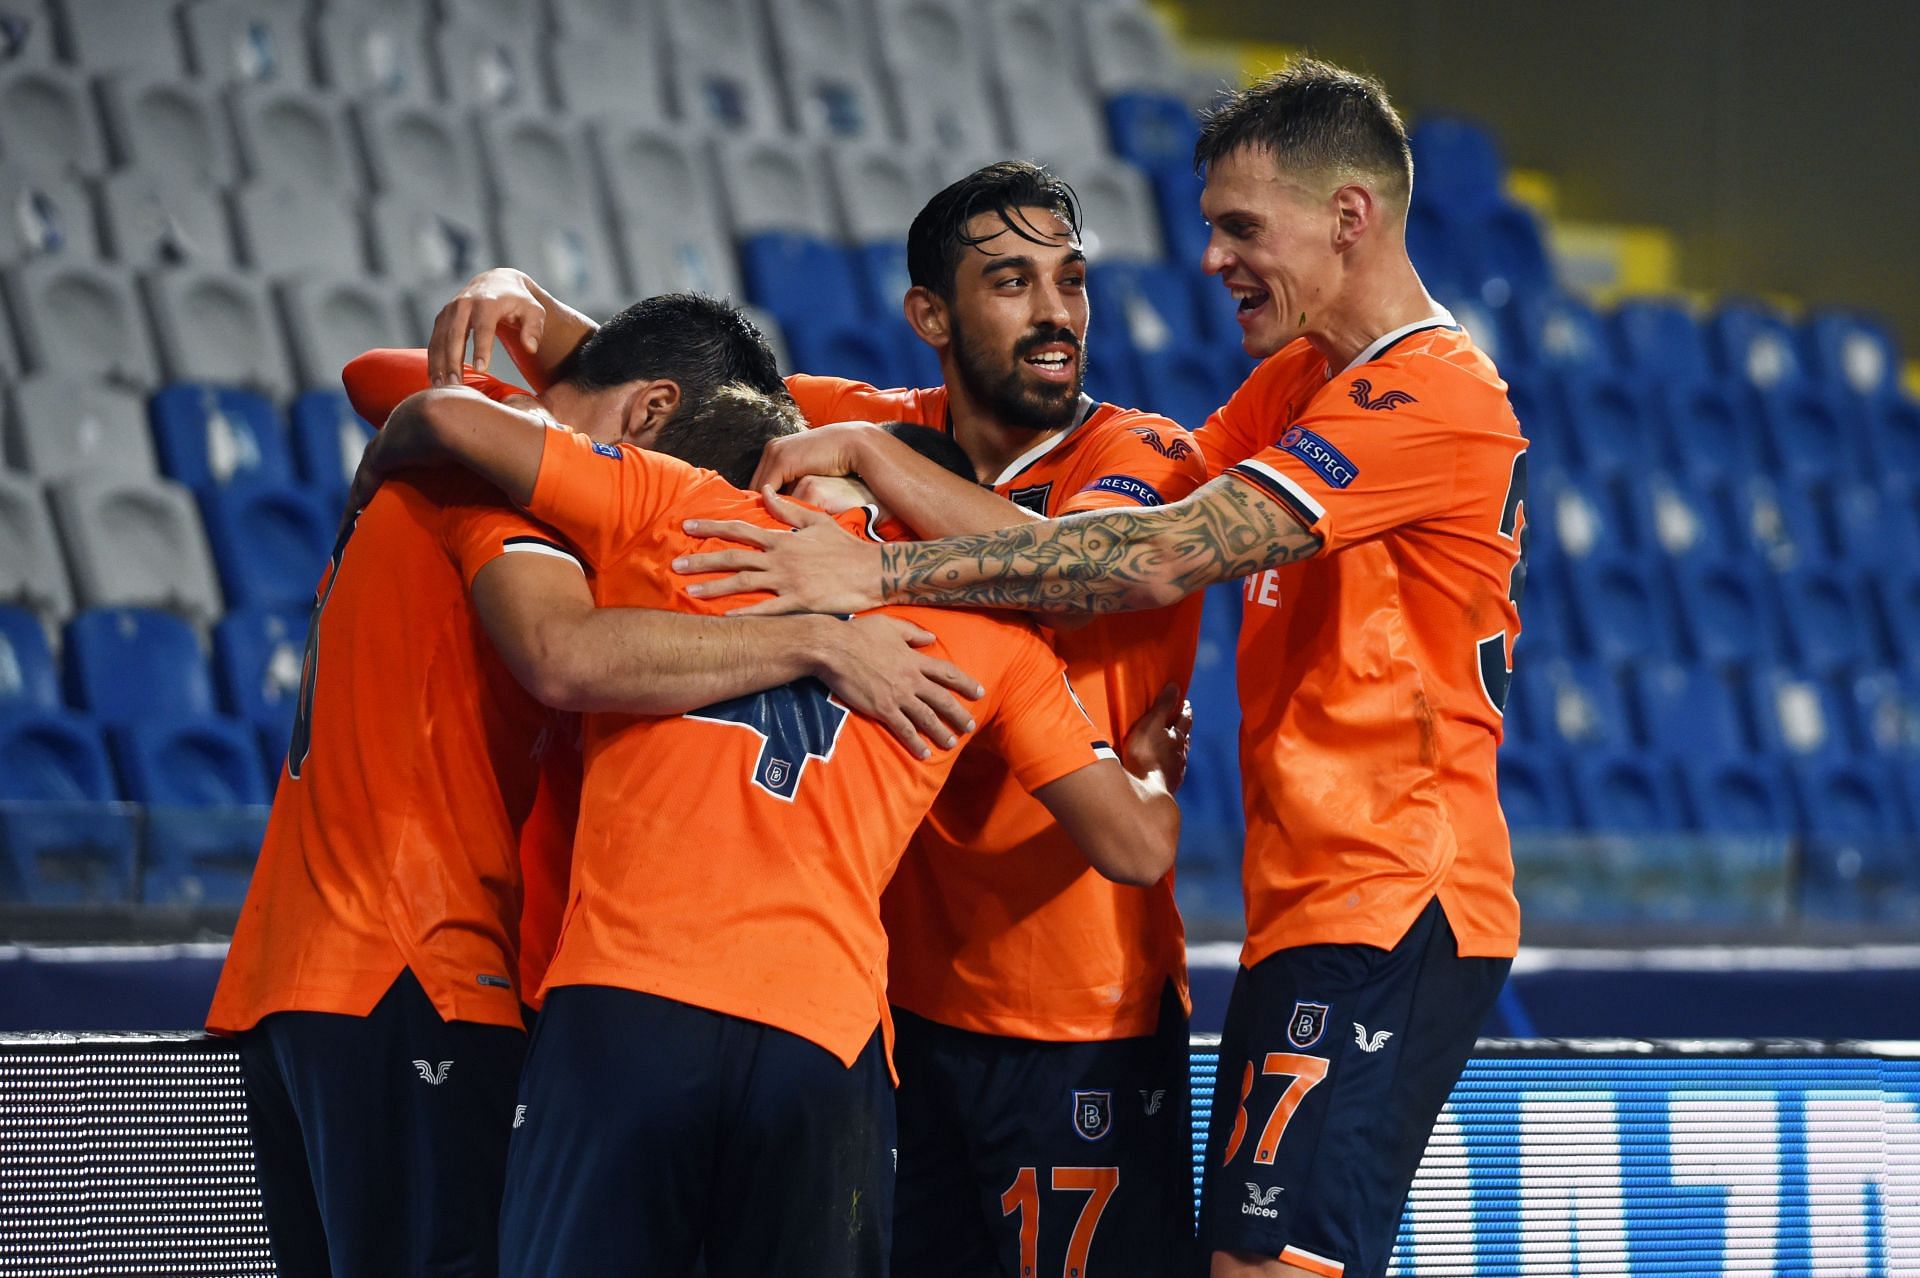 Istanbul Basaksehir are looking to make their Conference League debut